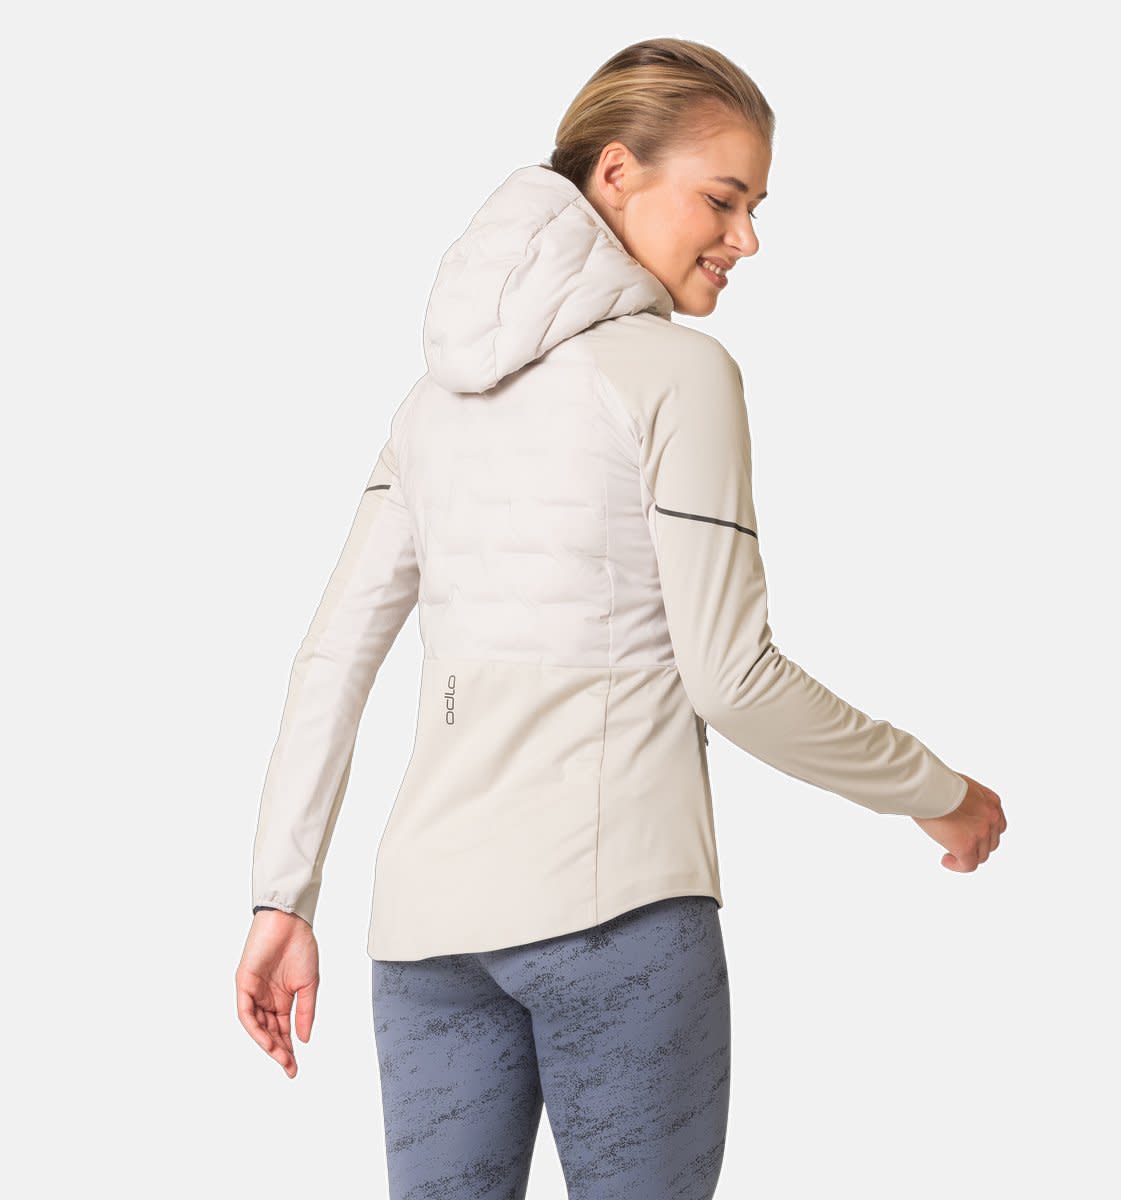 ODLO Chaqueta running mujer WHIRL odlo silver grey - Private Sport Shop